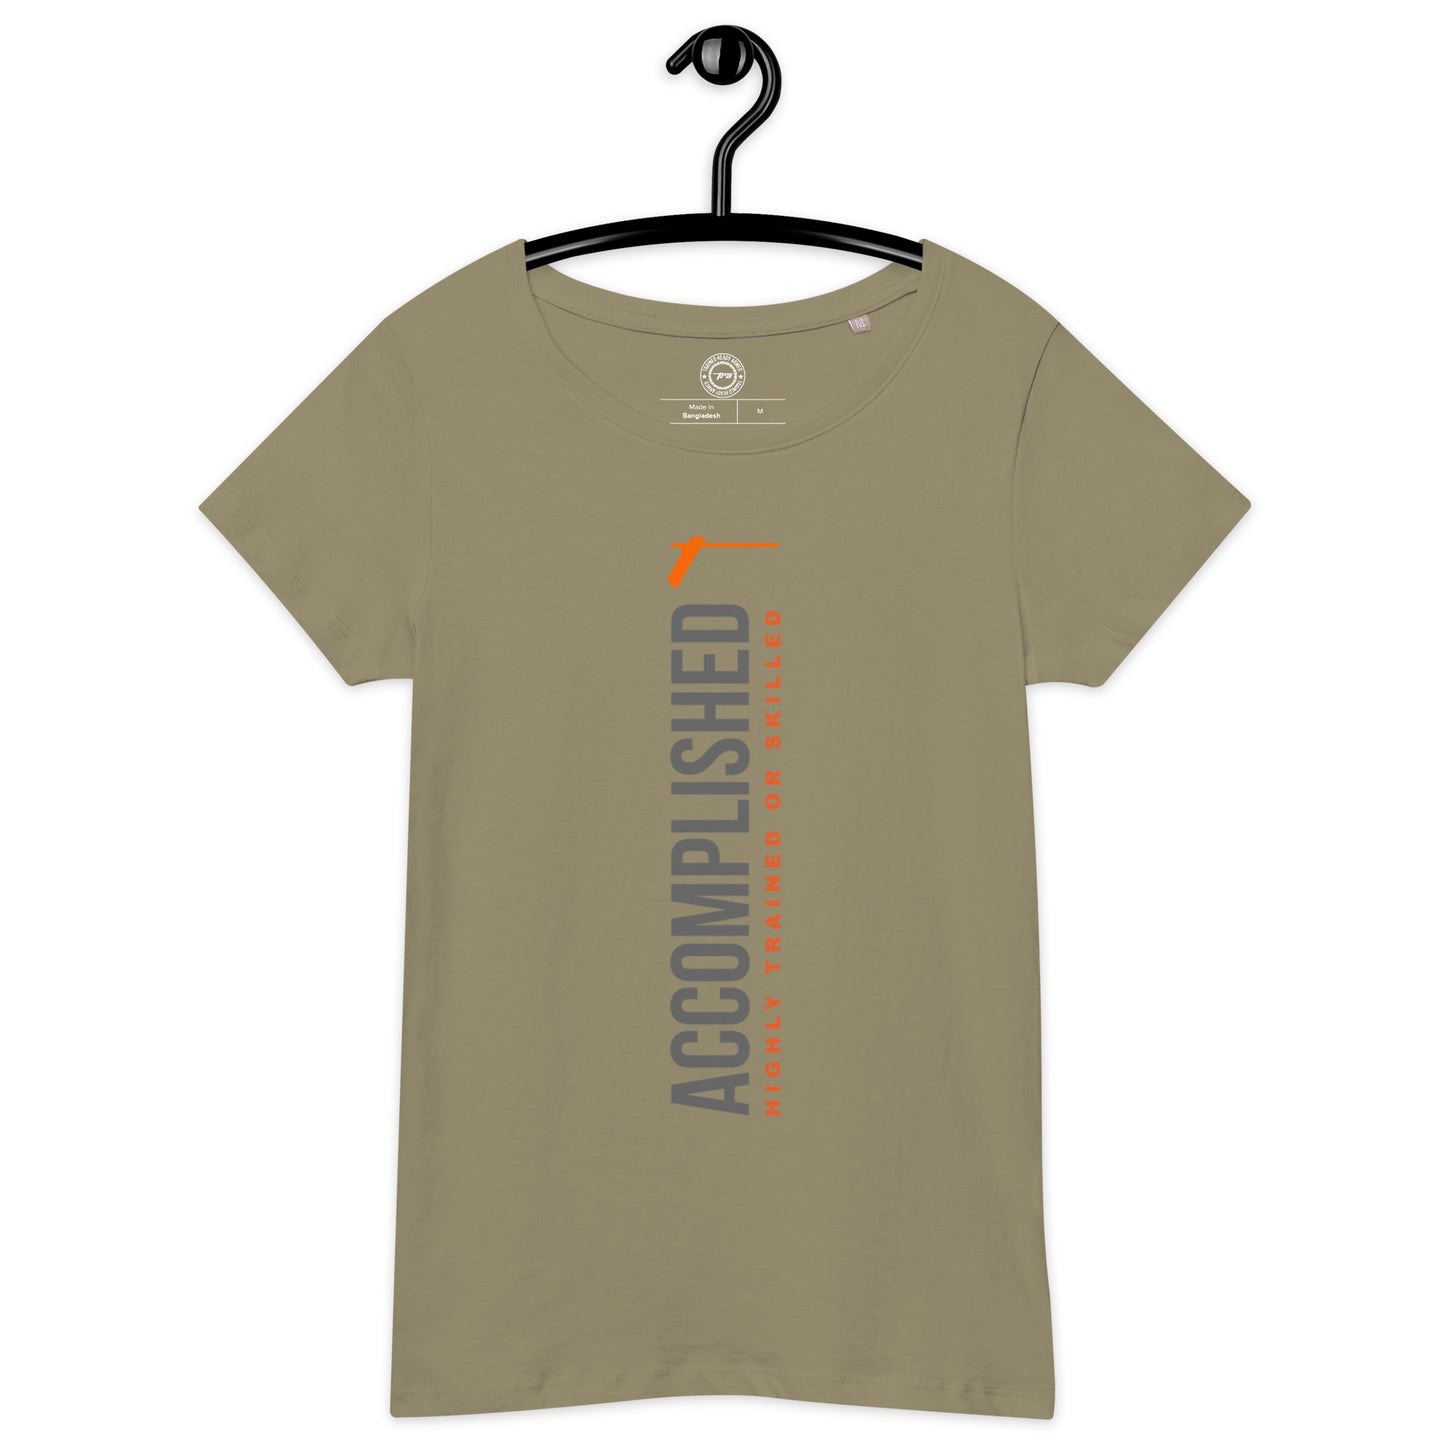 TRA "ACCOMPLISHED" Women’s basic organic t-shirt - Trained Ready Armed Apparel